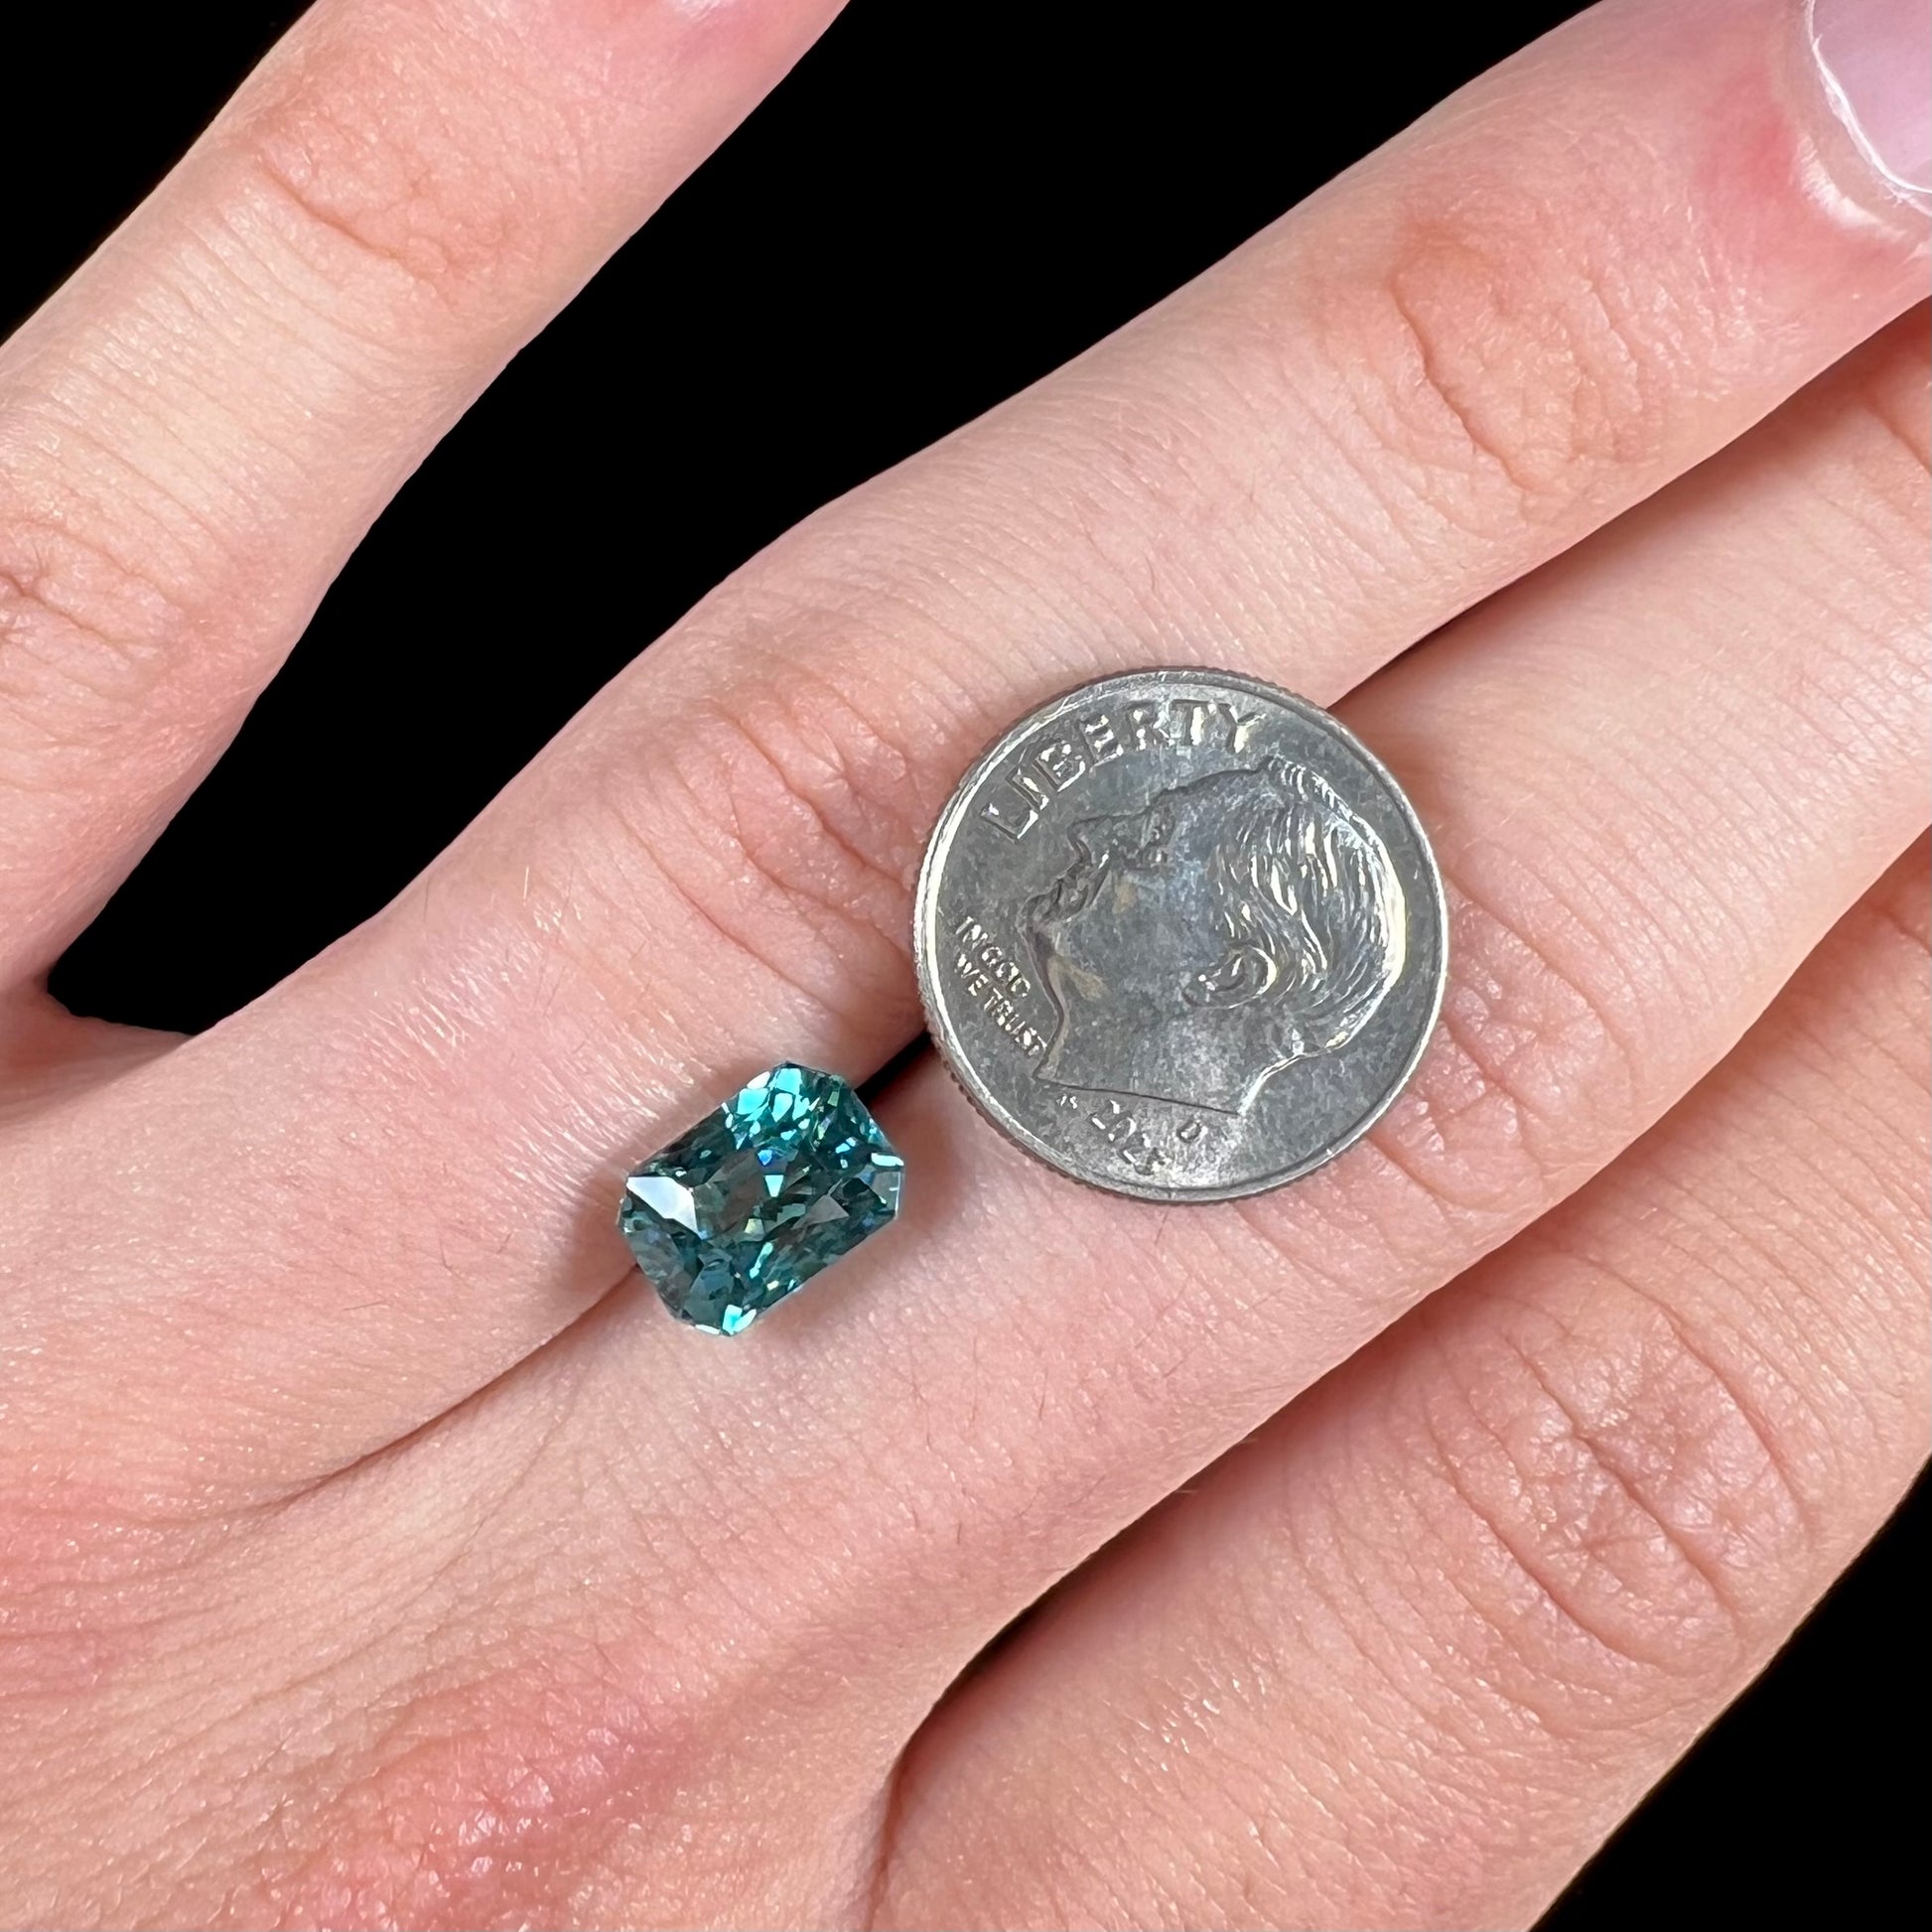 A loose, modified emerald cut blue zircon gemstone.  The stone has a large belly.